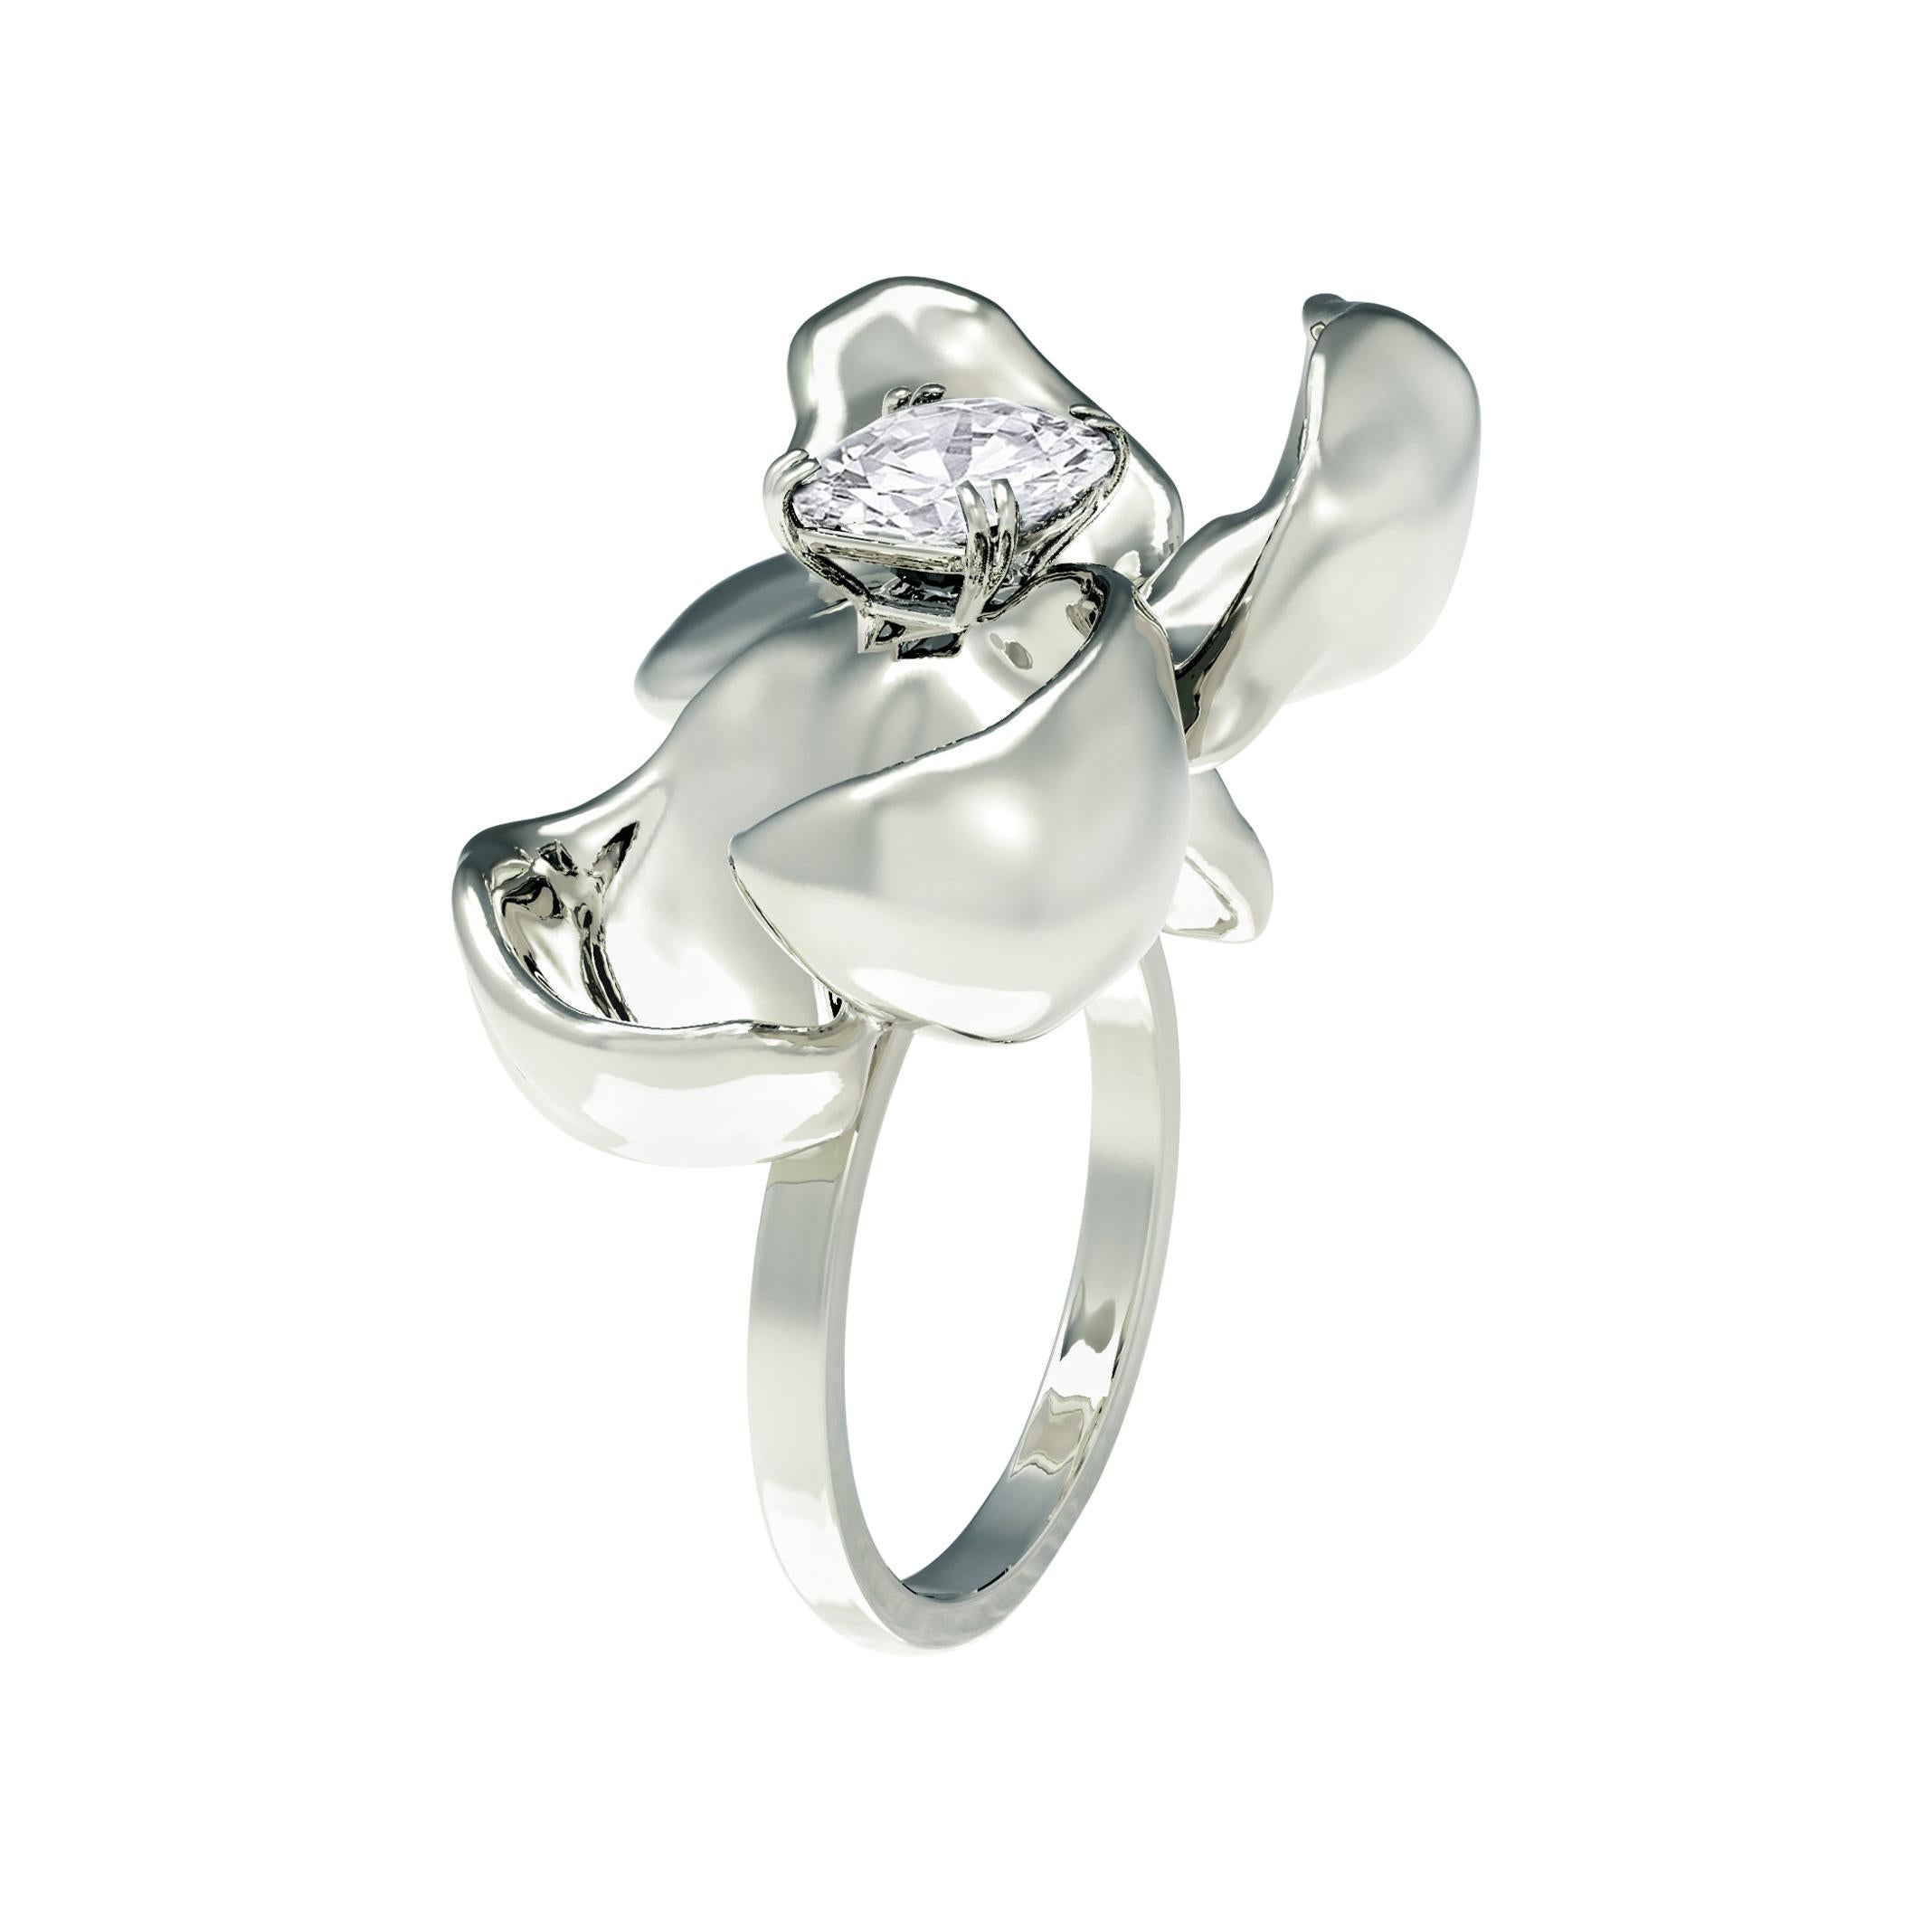 This limited edition Magnolia engagement ring is crafted from 14 karat white gold and features a cushion cut crushed ice diamond. With a weight of 8.59 grams, the ring is heavy and larger than it appears in photos, while the petals' size and shape